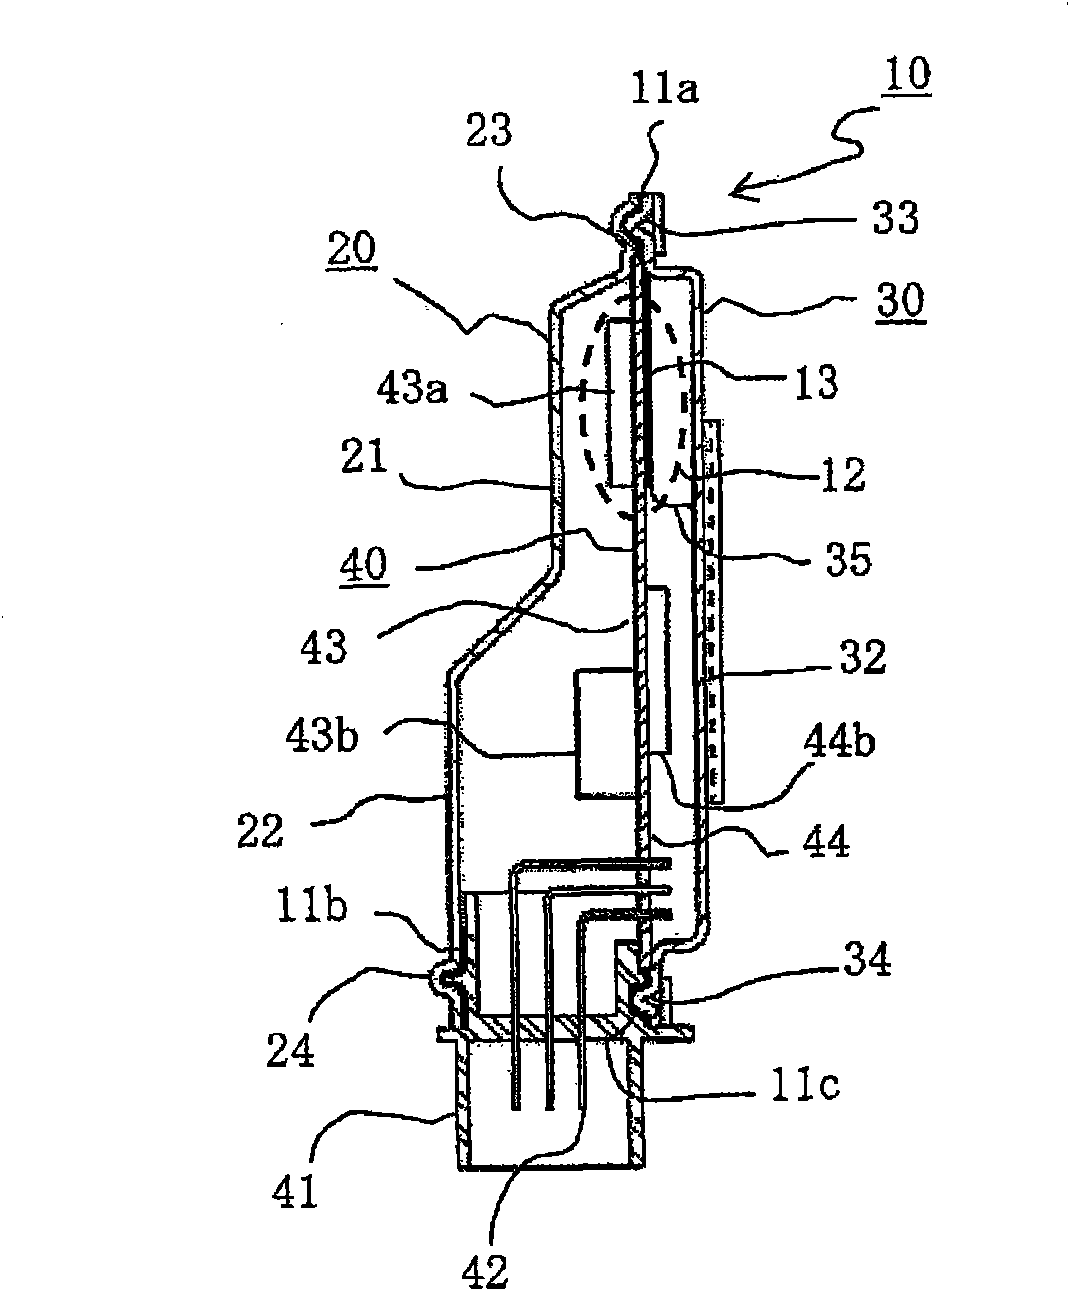 Board housing case for vehicle-mounted electronic device